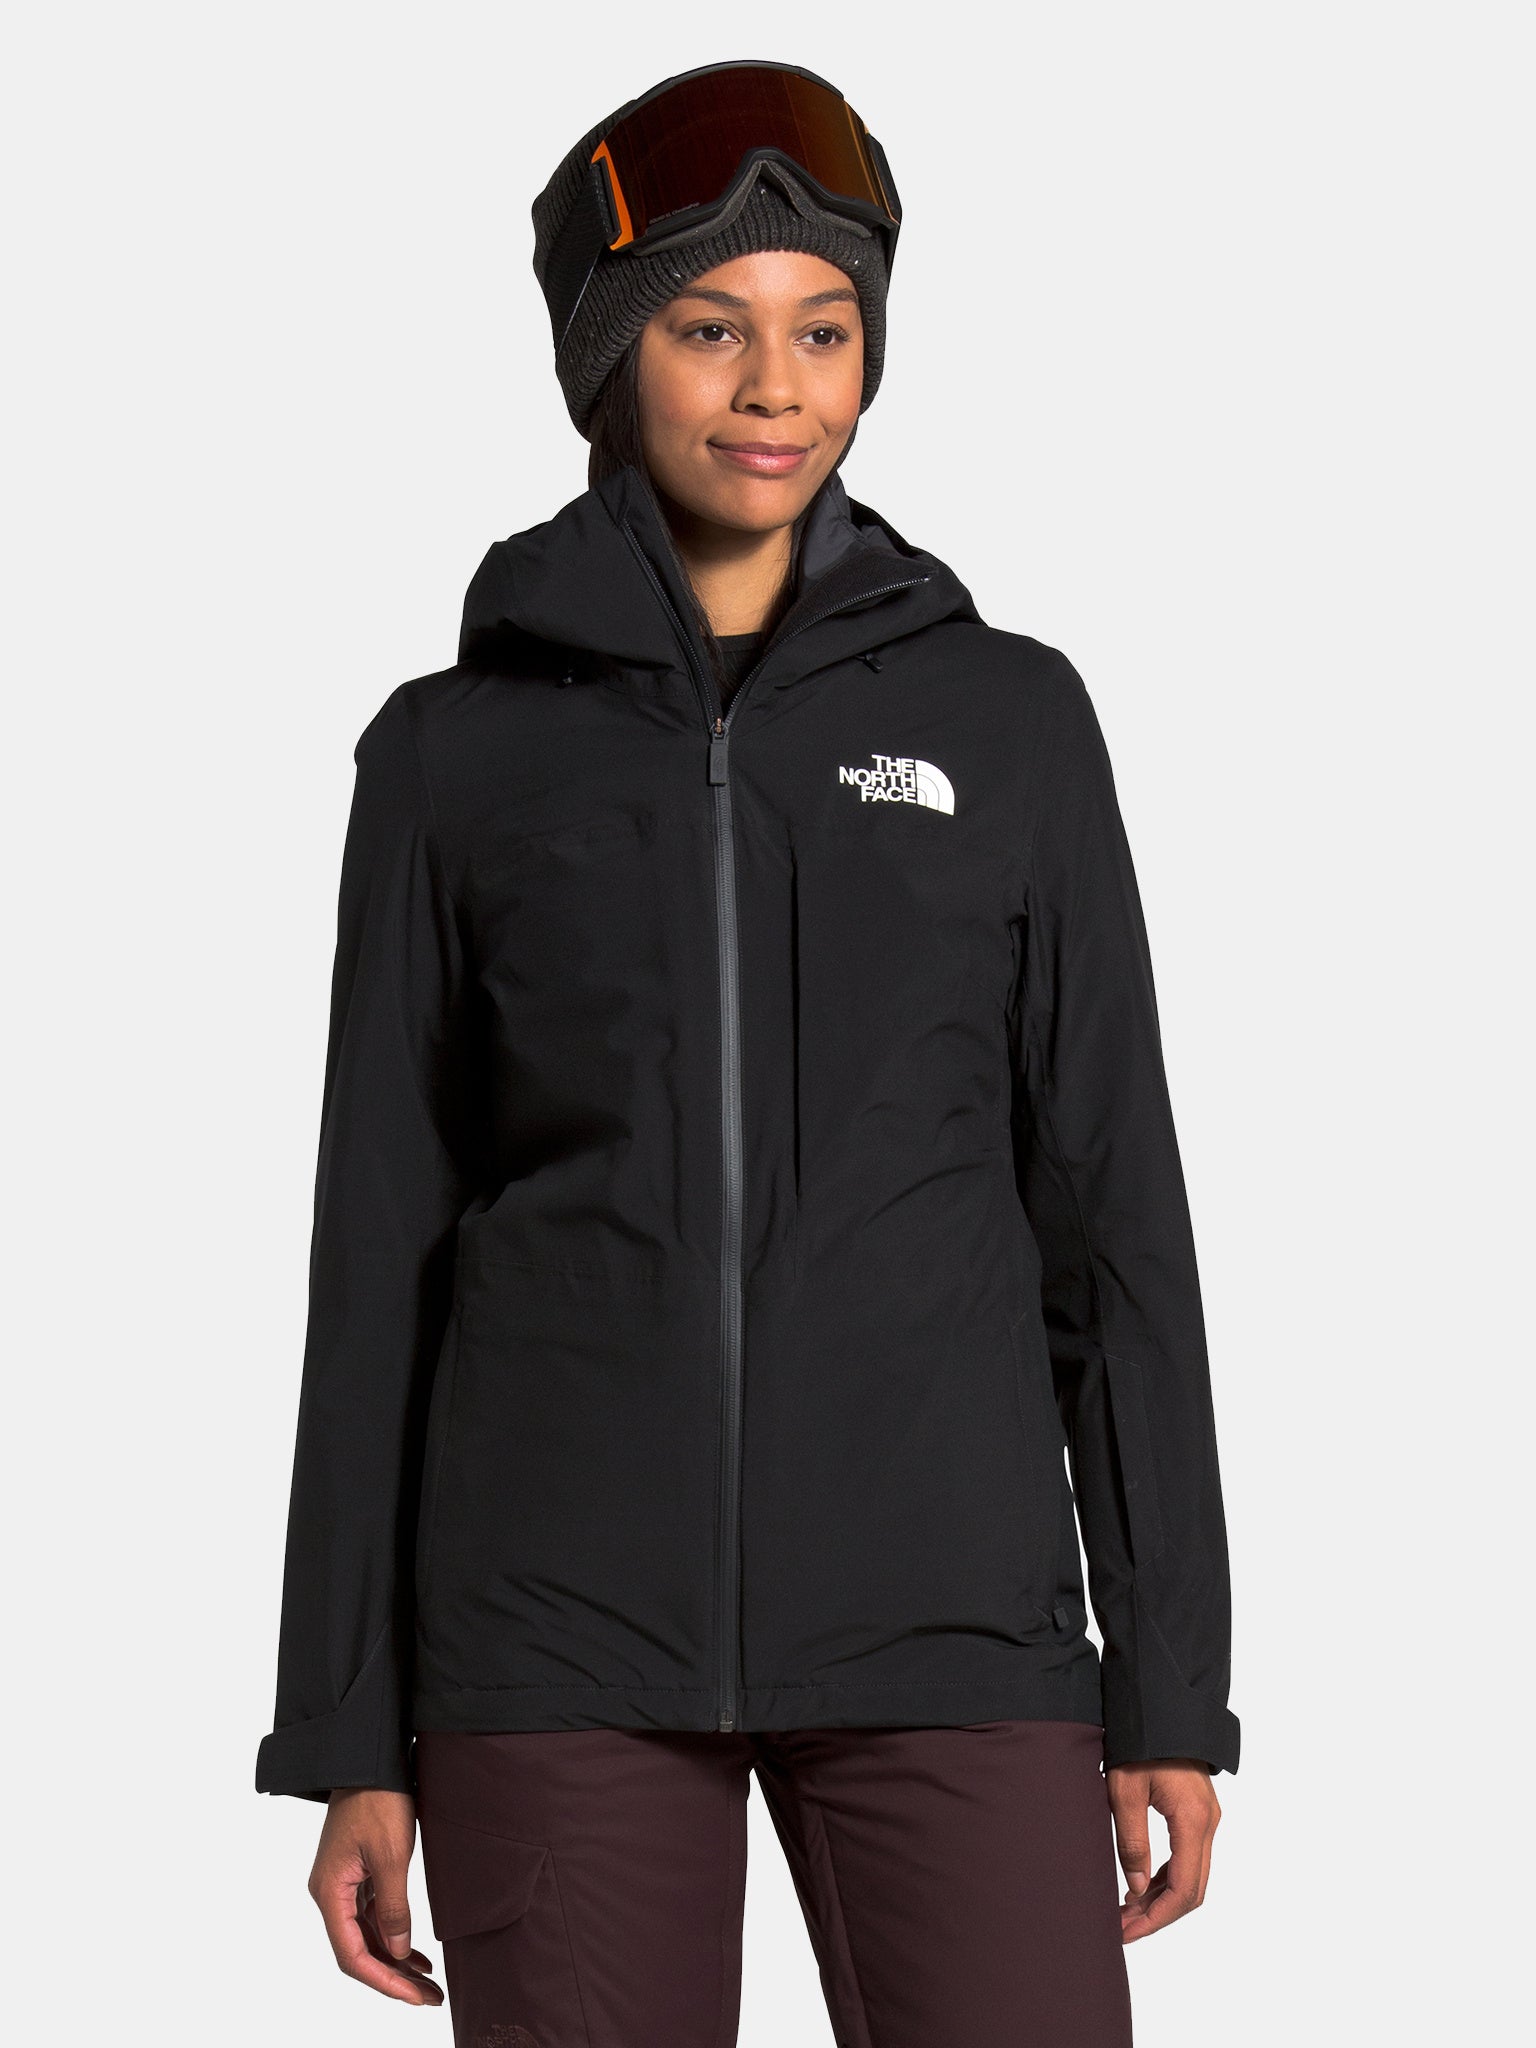 gegevens Evolueren professioneel The North Face Women's ThermoBall Eco Snow Triclimate Jacket - Saint Bernard